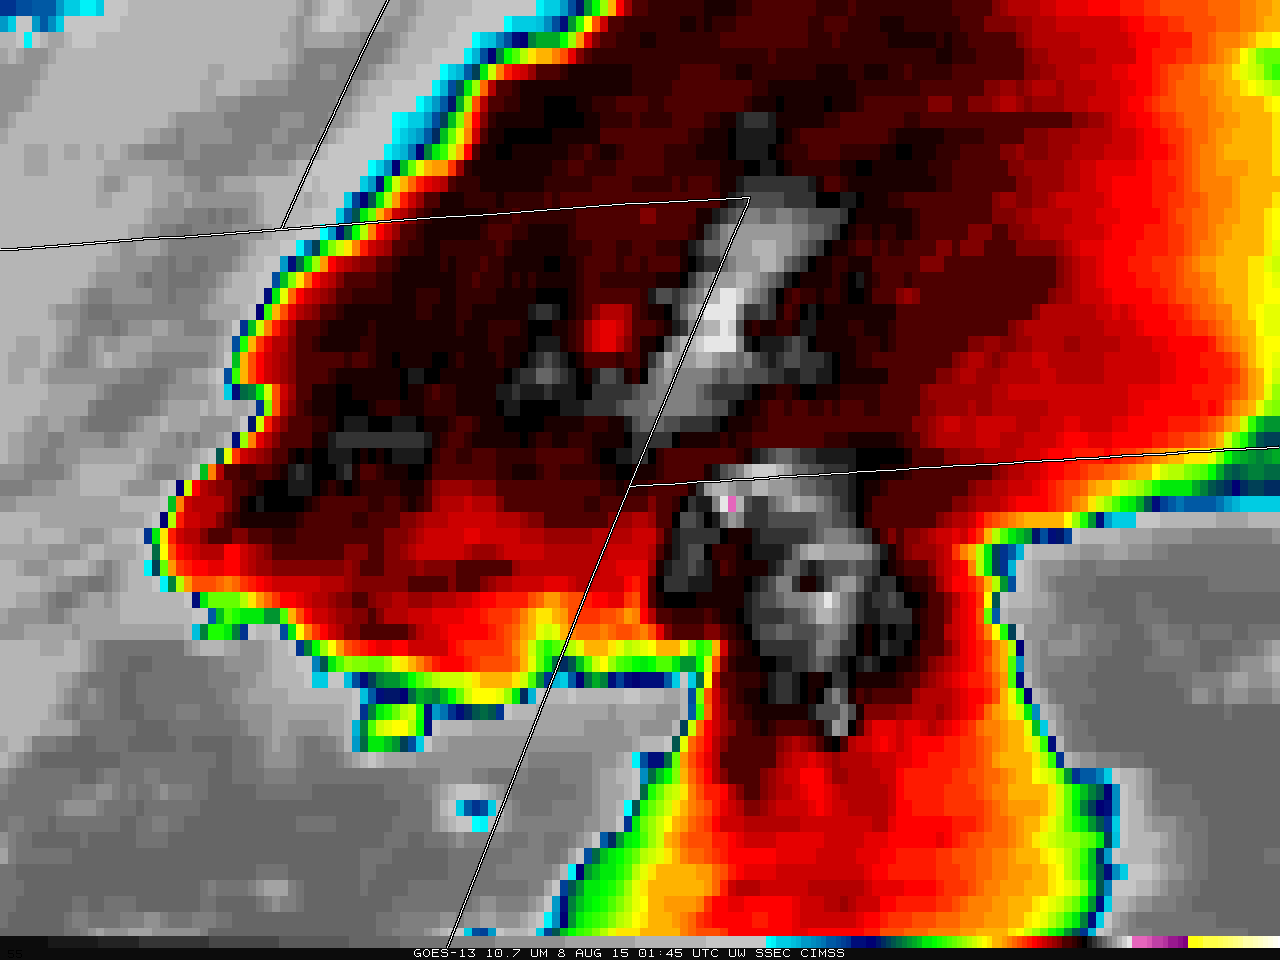 GOES-13 Infrared imagery (10.7 µm) 0015 UTC 8 August - 0215 UTC 8 August [click to animate]